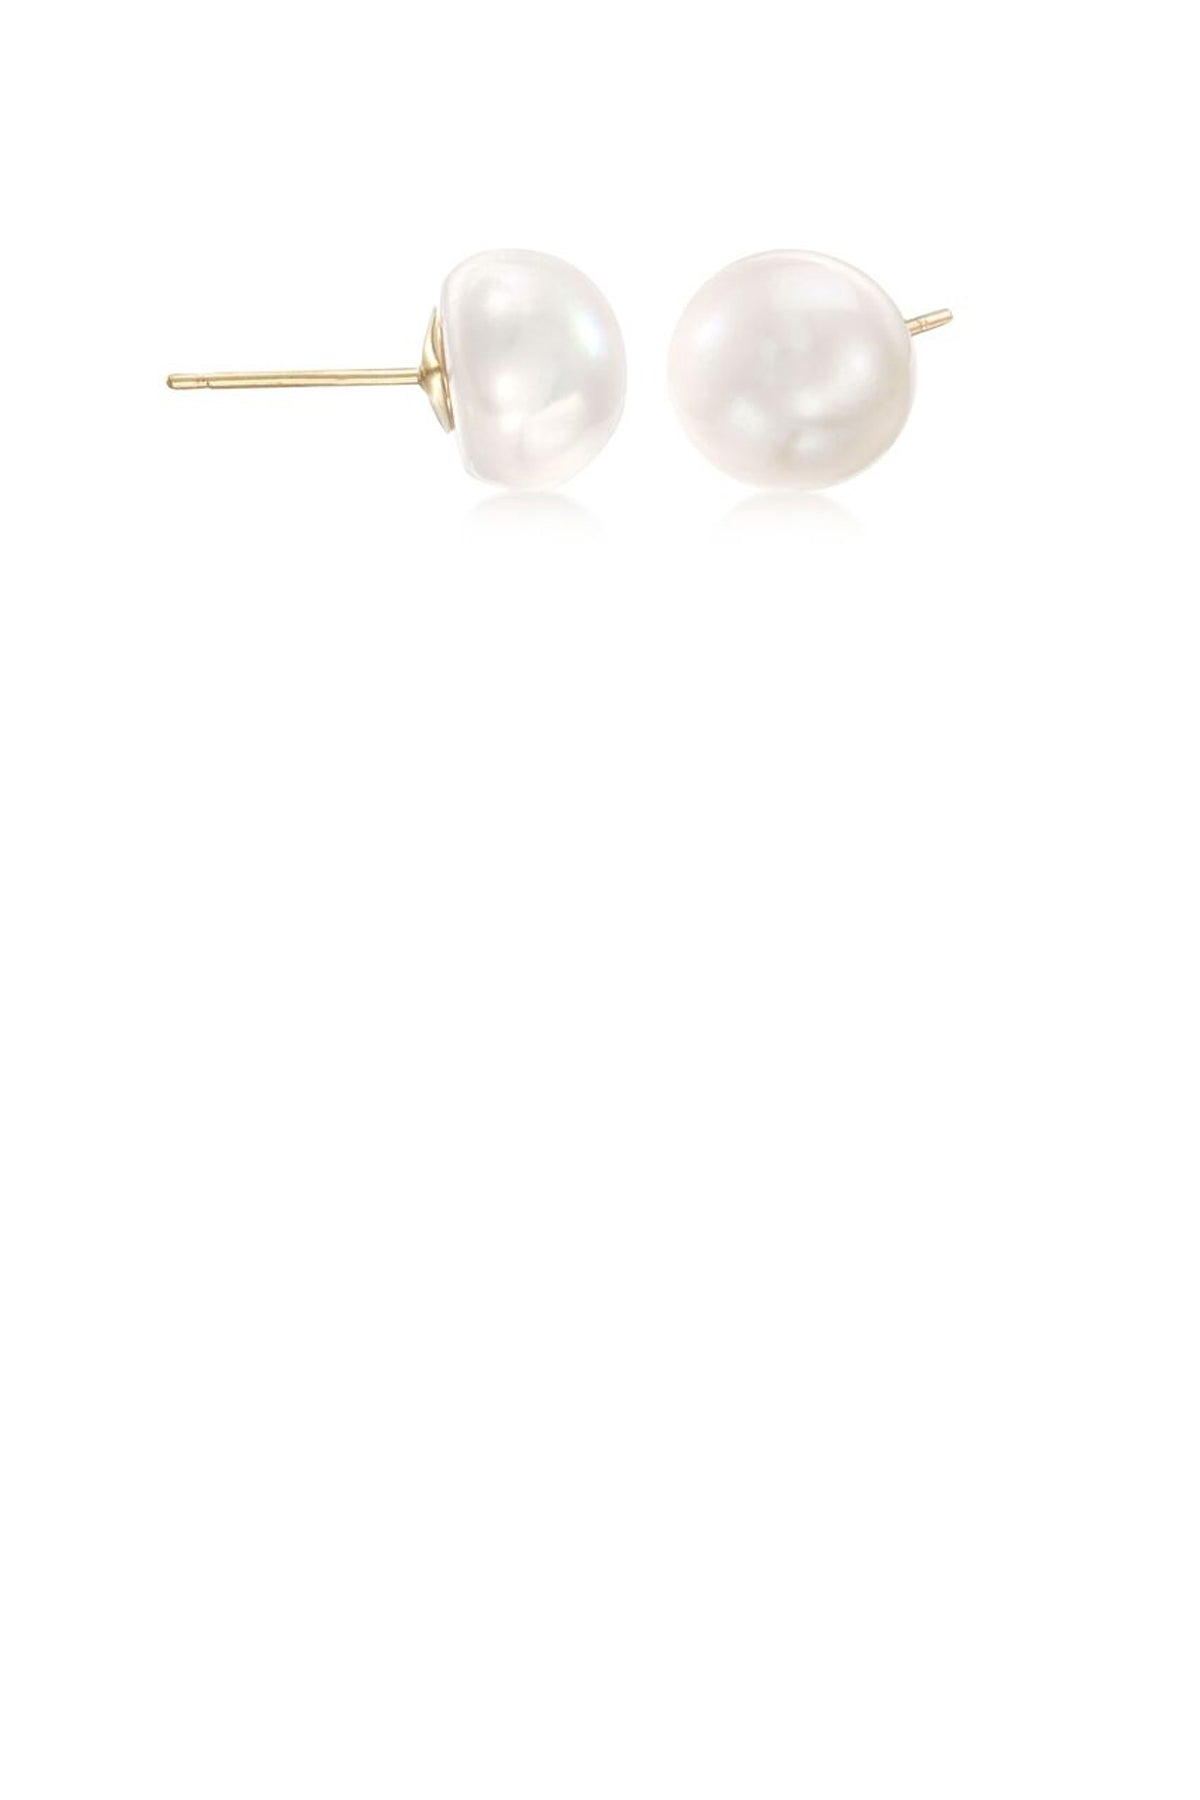 6mm White Pearl Studs - ShopAuthentique